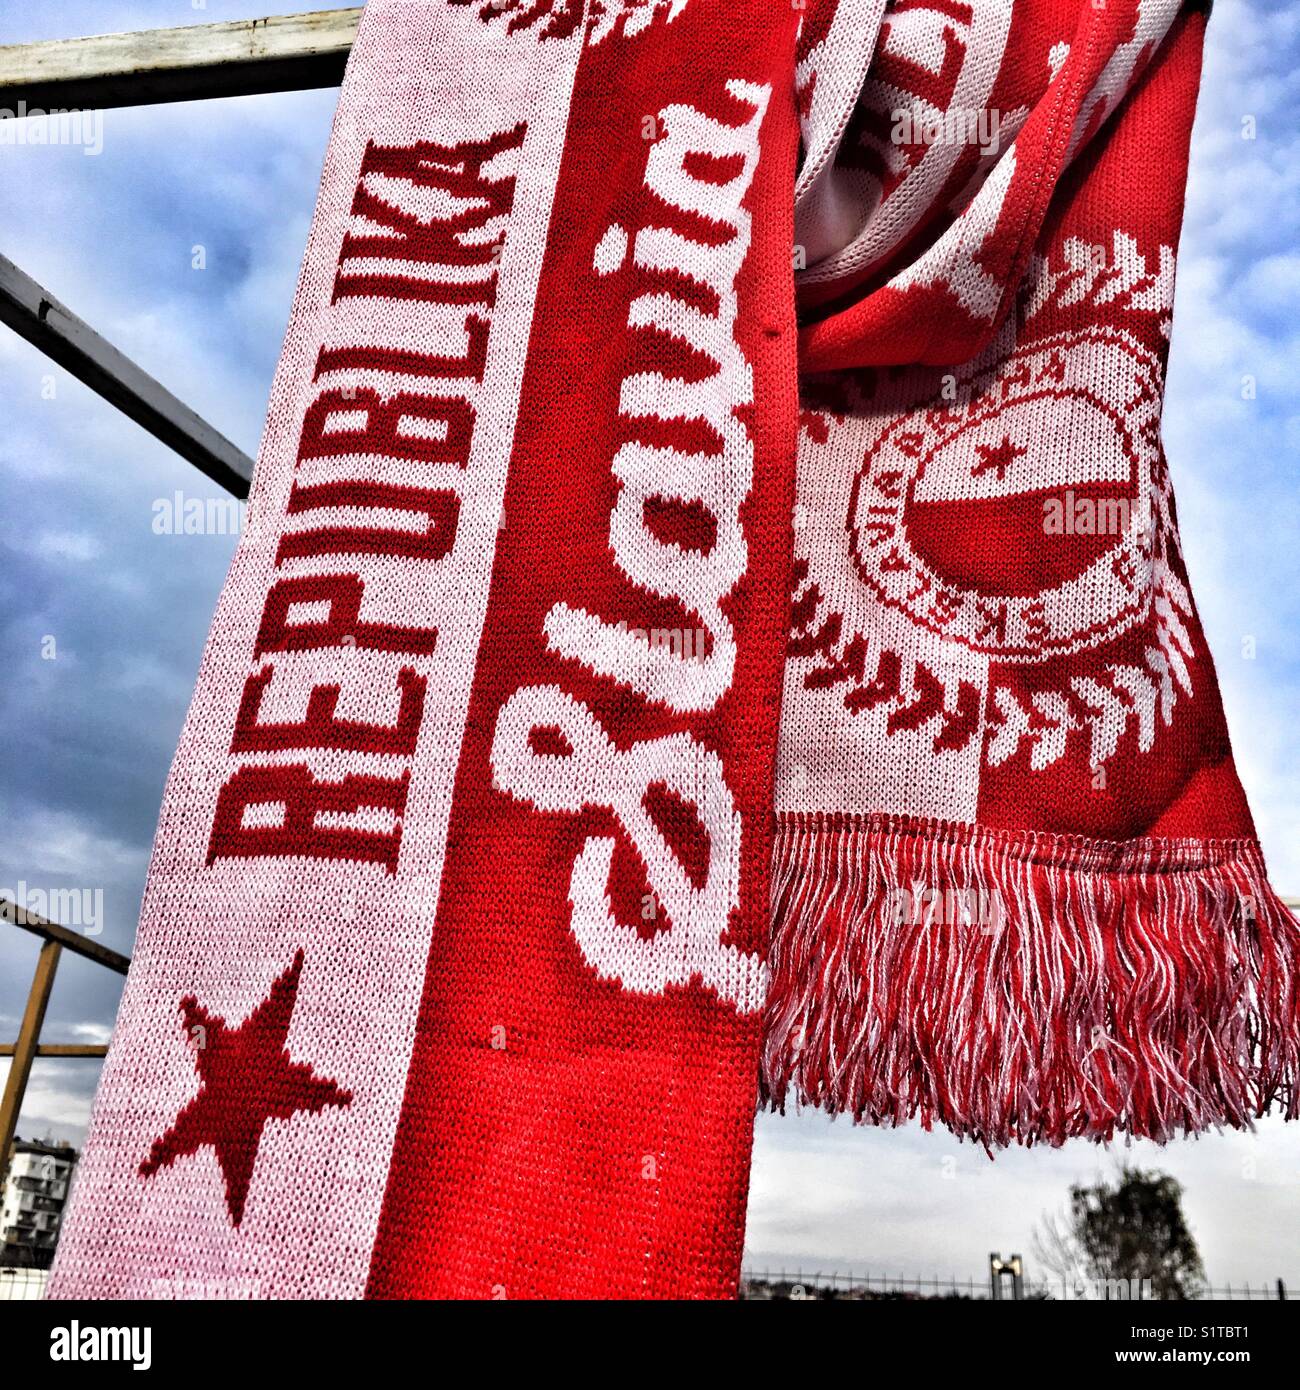 Scarf in the colors of the Czech football club Slavia Prague Stock Photo